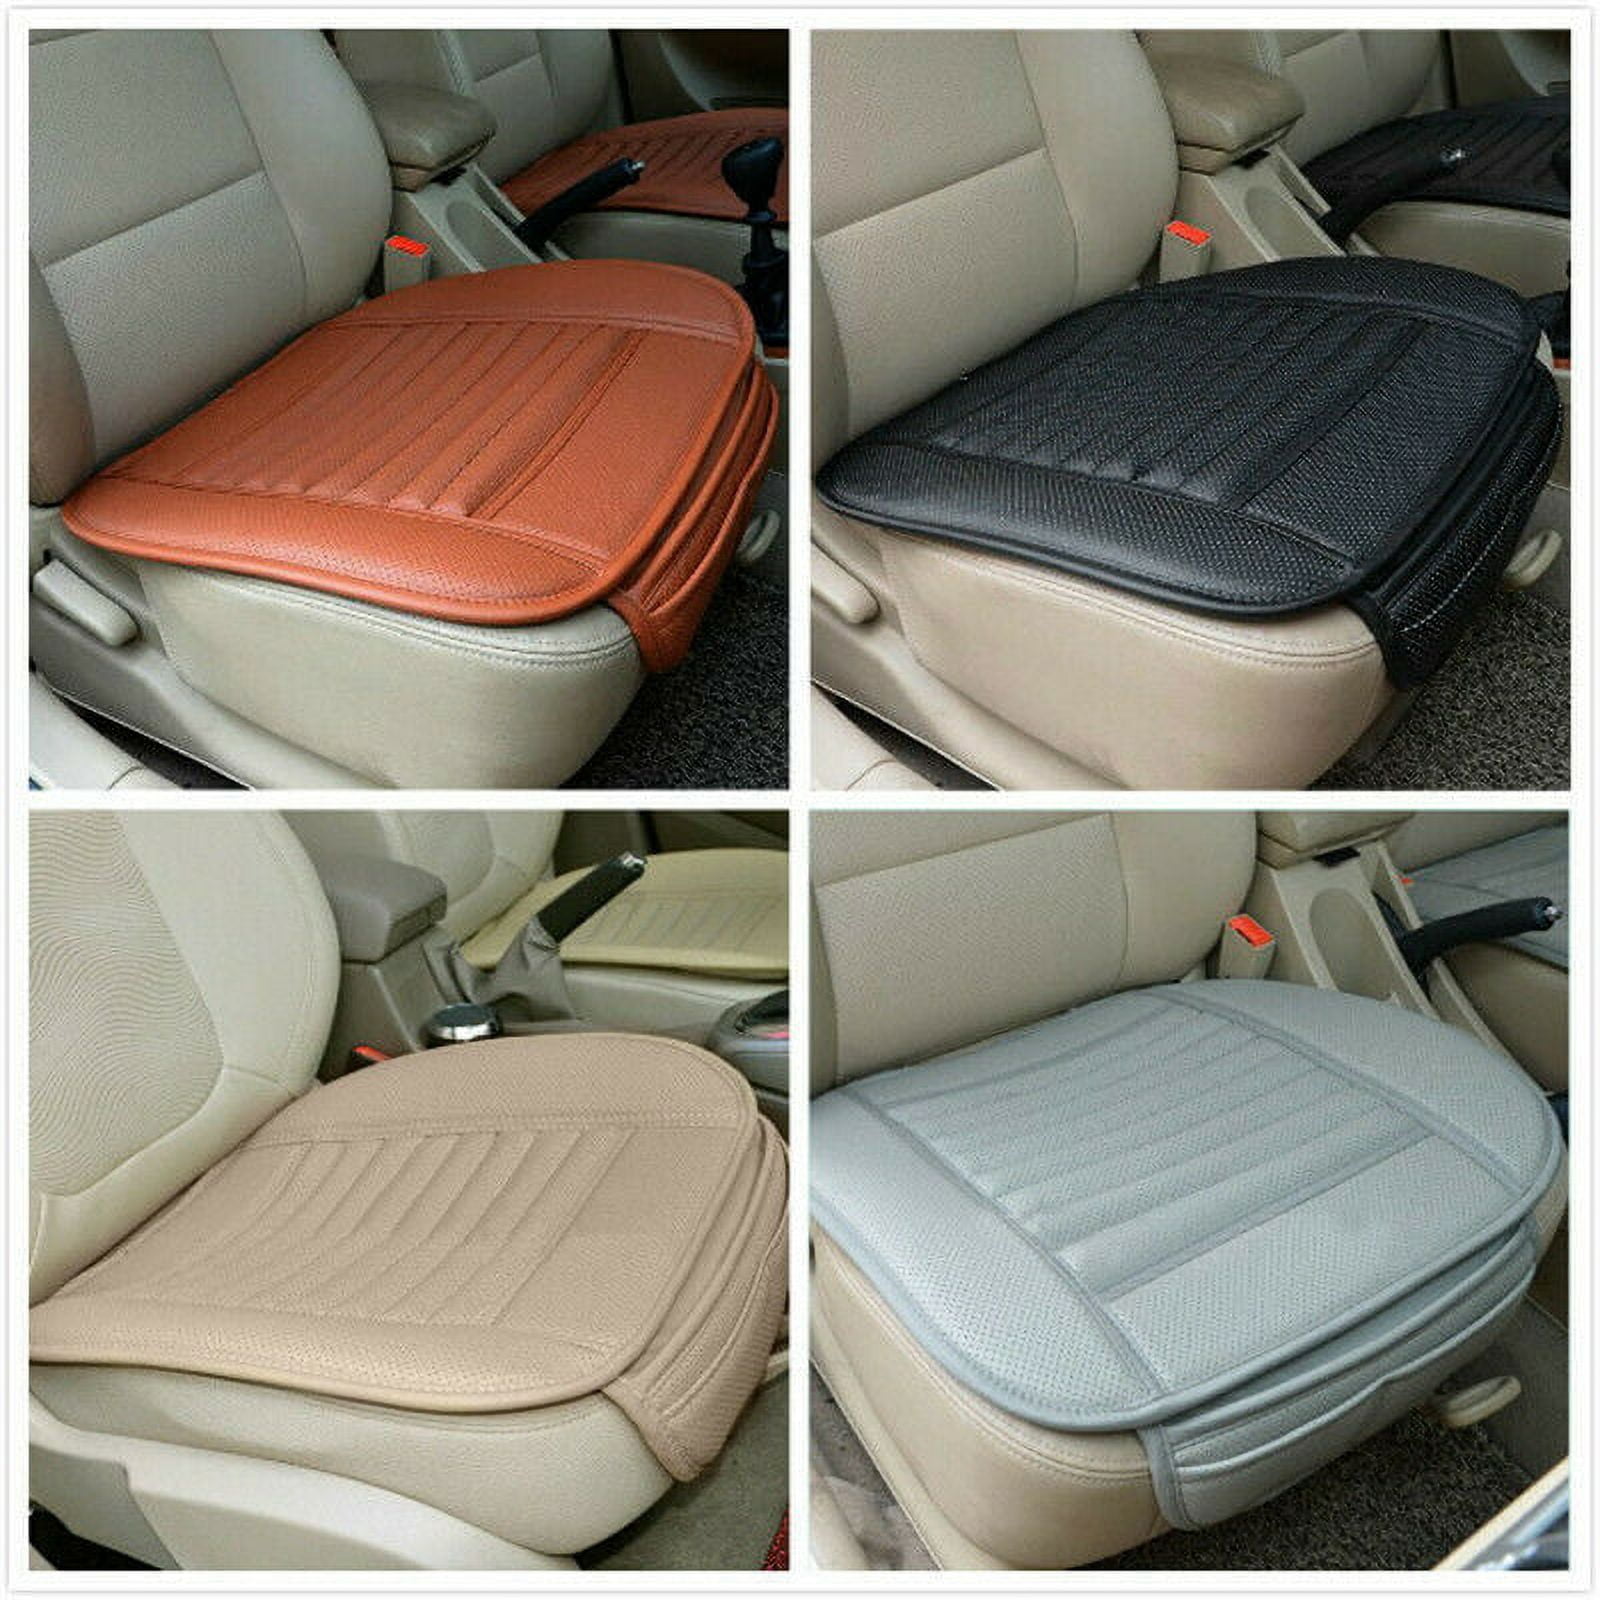 Car Seat cover Kimi, seat protector for cars in racing look black, Seat  Cushions, Car Seat covers, Seat covers & Cushions